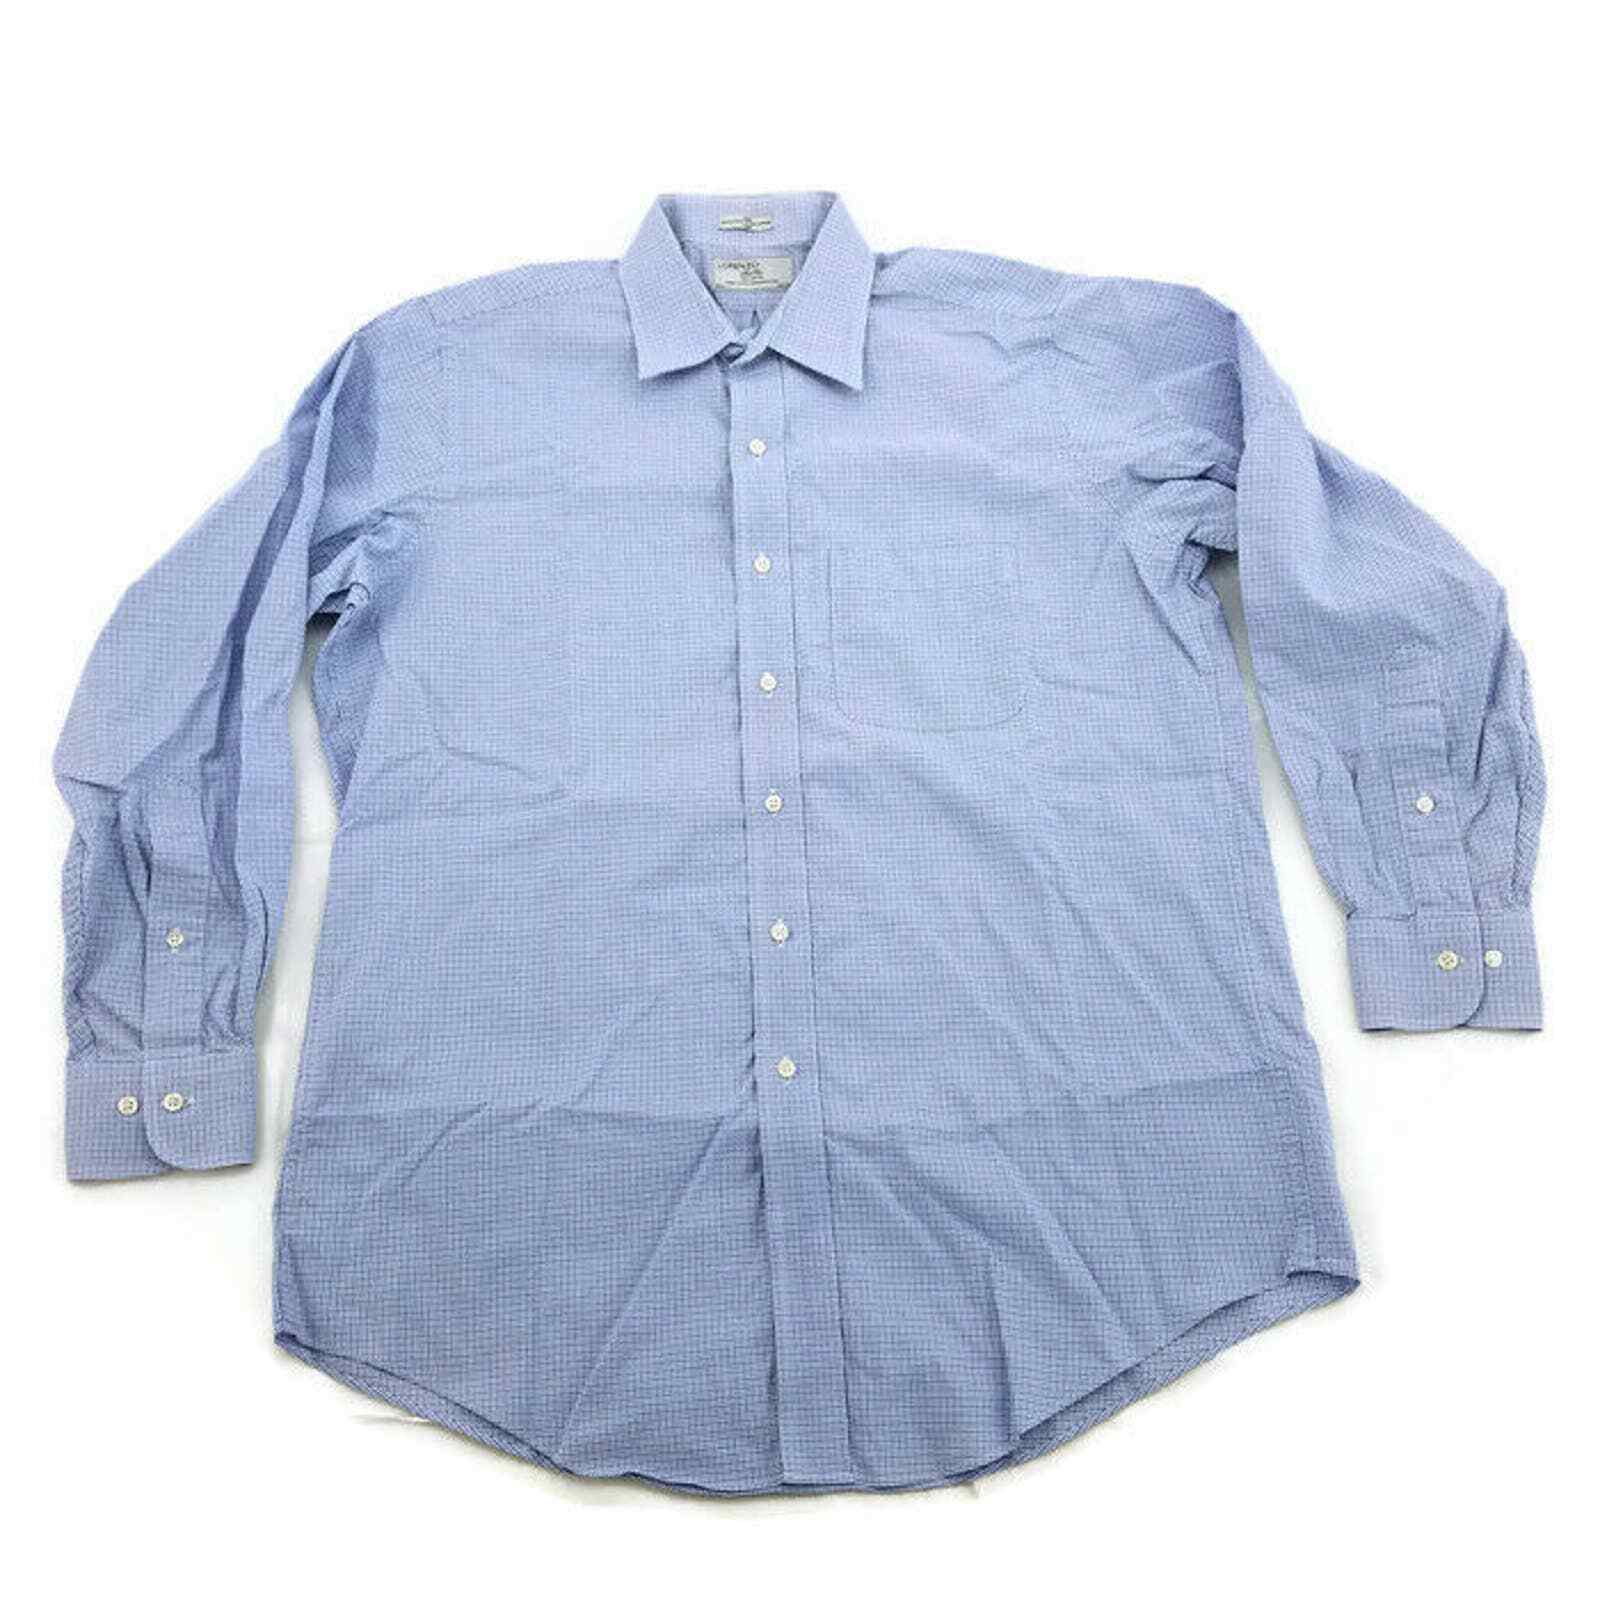 Primary image for Lorenzo Uomo Mens Dress Shirt Blue/White Checkered L/S Button Up  15.5; 32/33